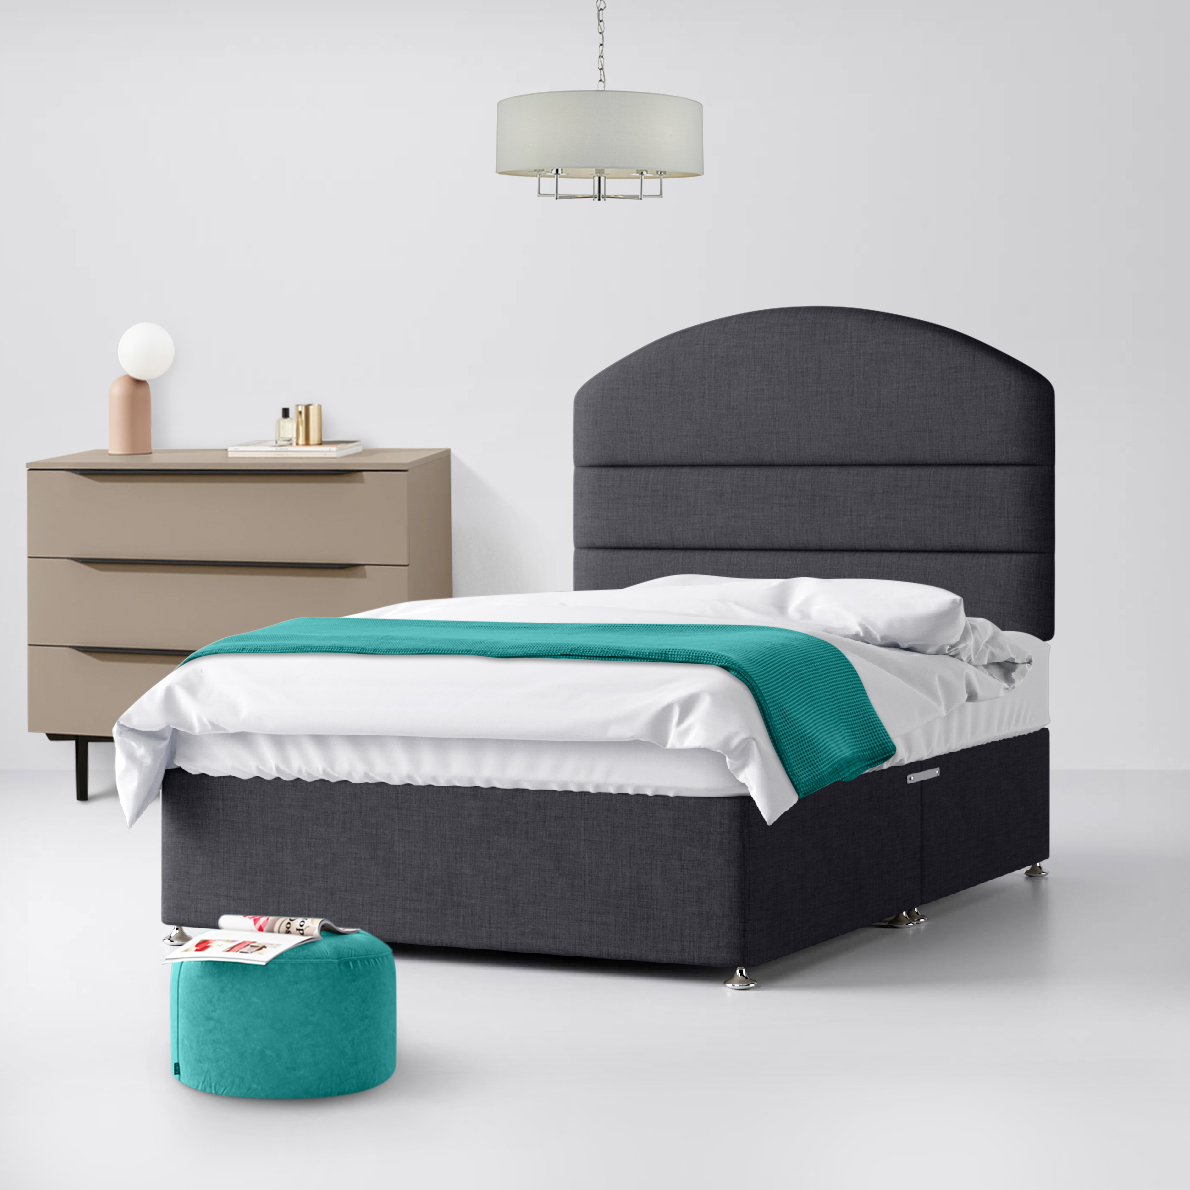 Super King Size - Divan Bed and Dudley Lined Headboard - Dark Grey - Charcoal - Fabric - 6ft - Happy Beds